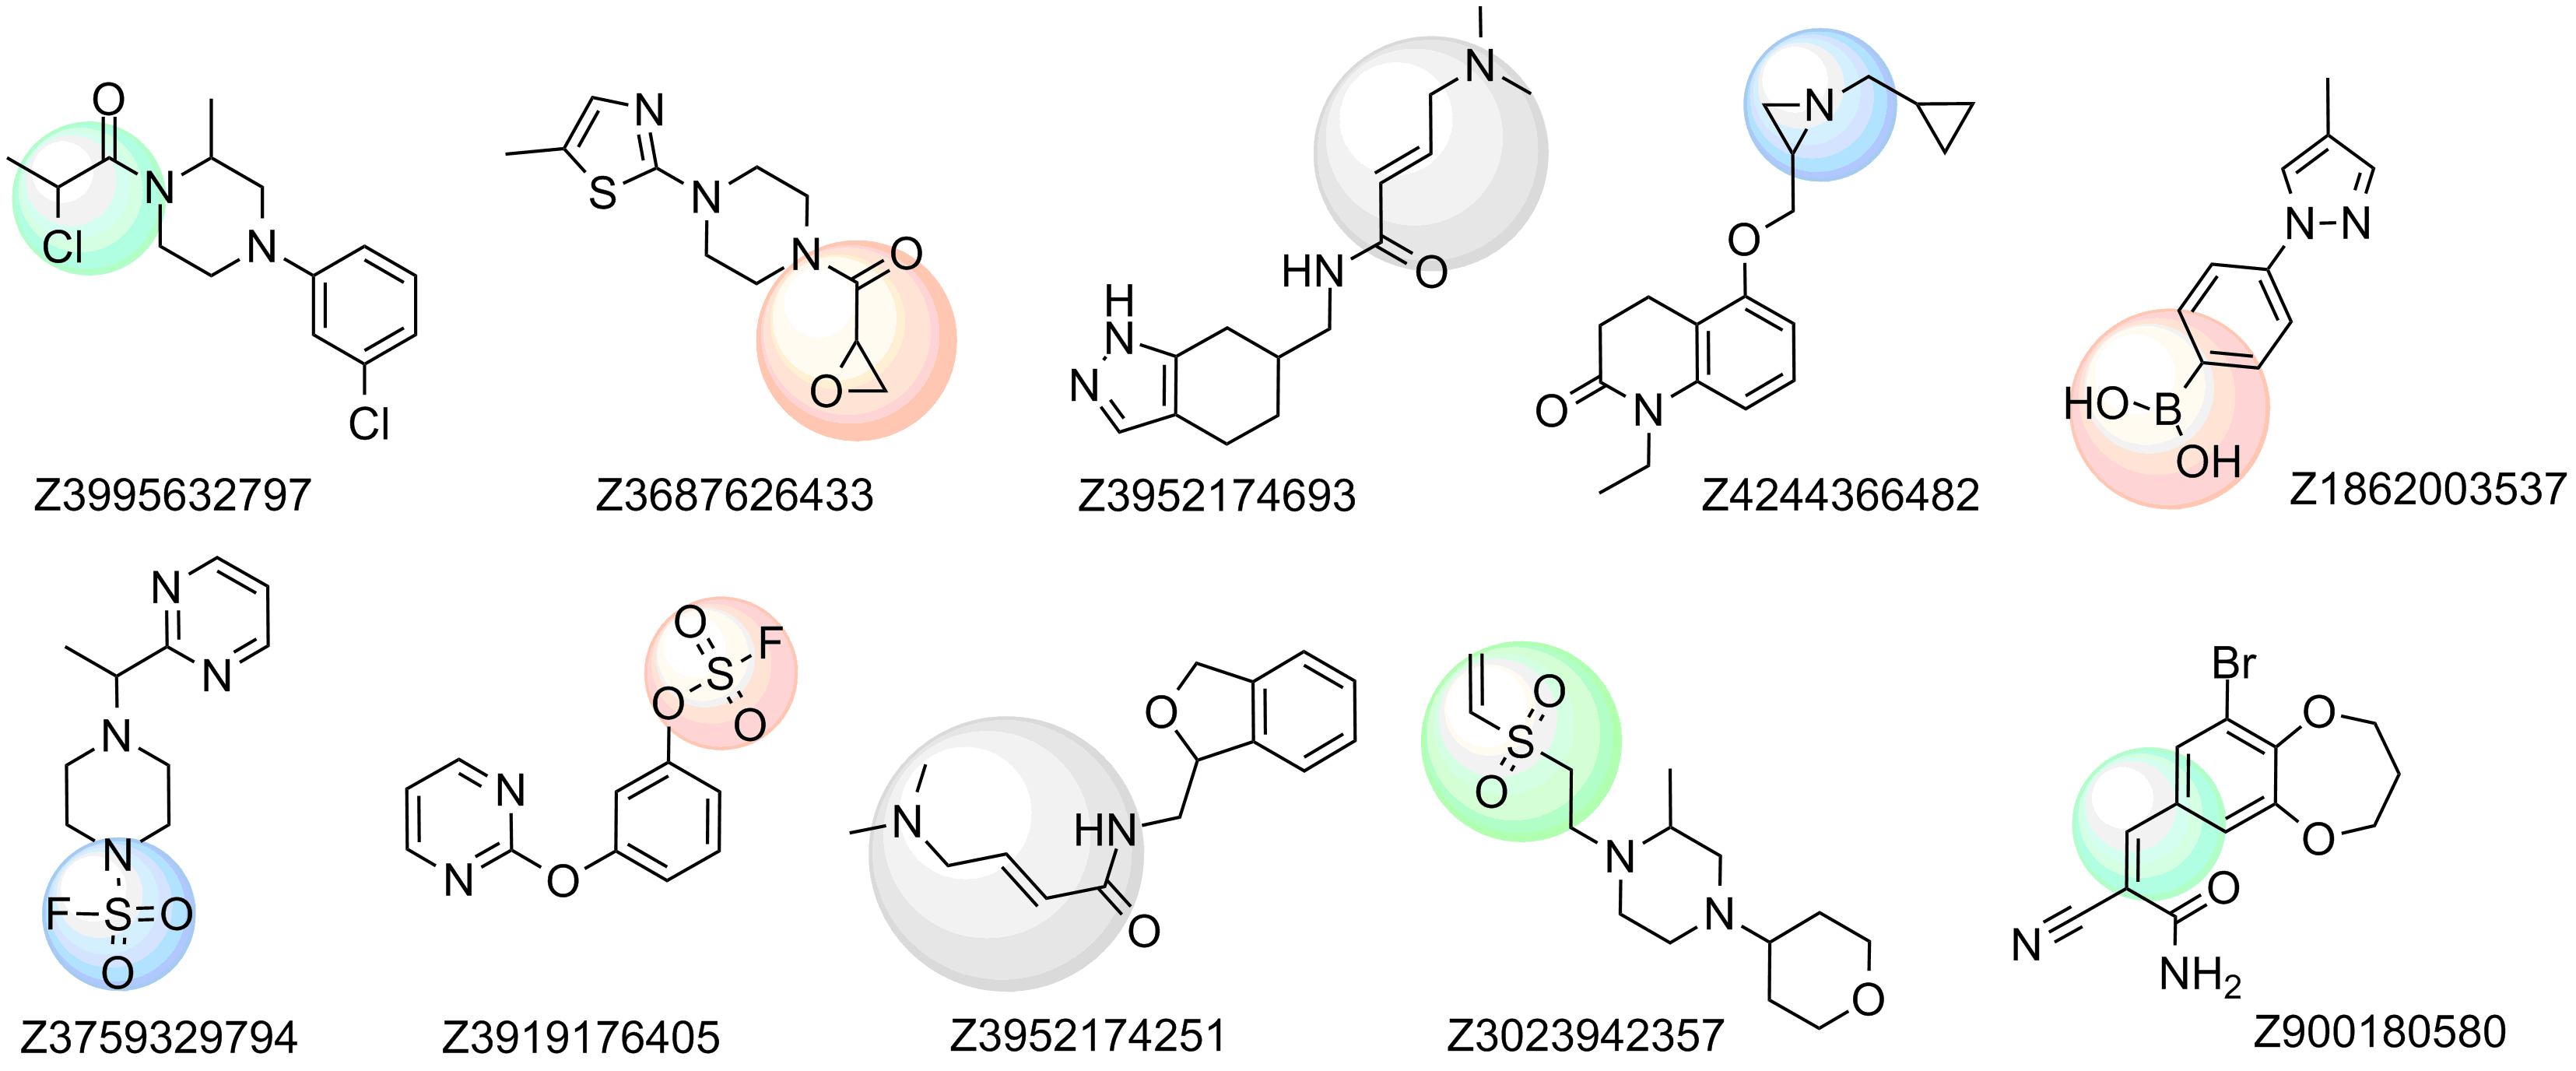 Examples of compounds in the library